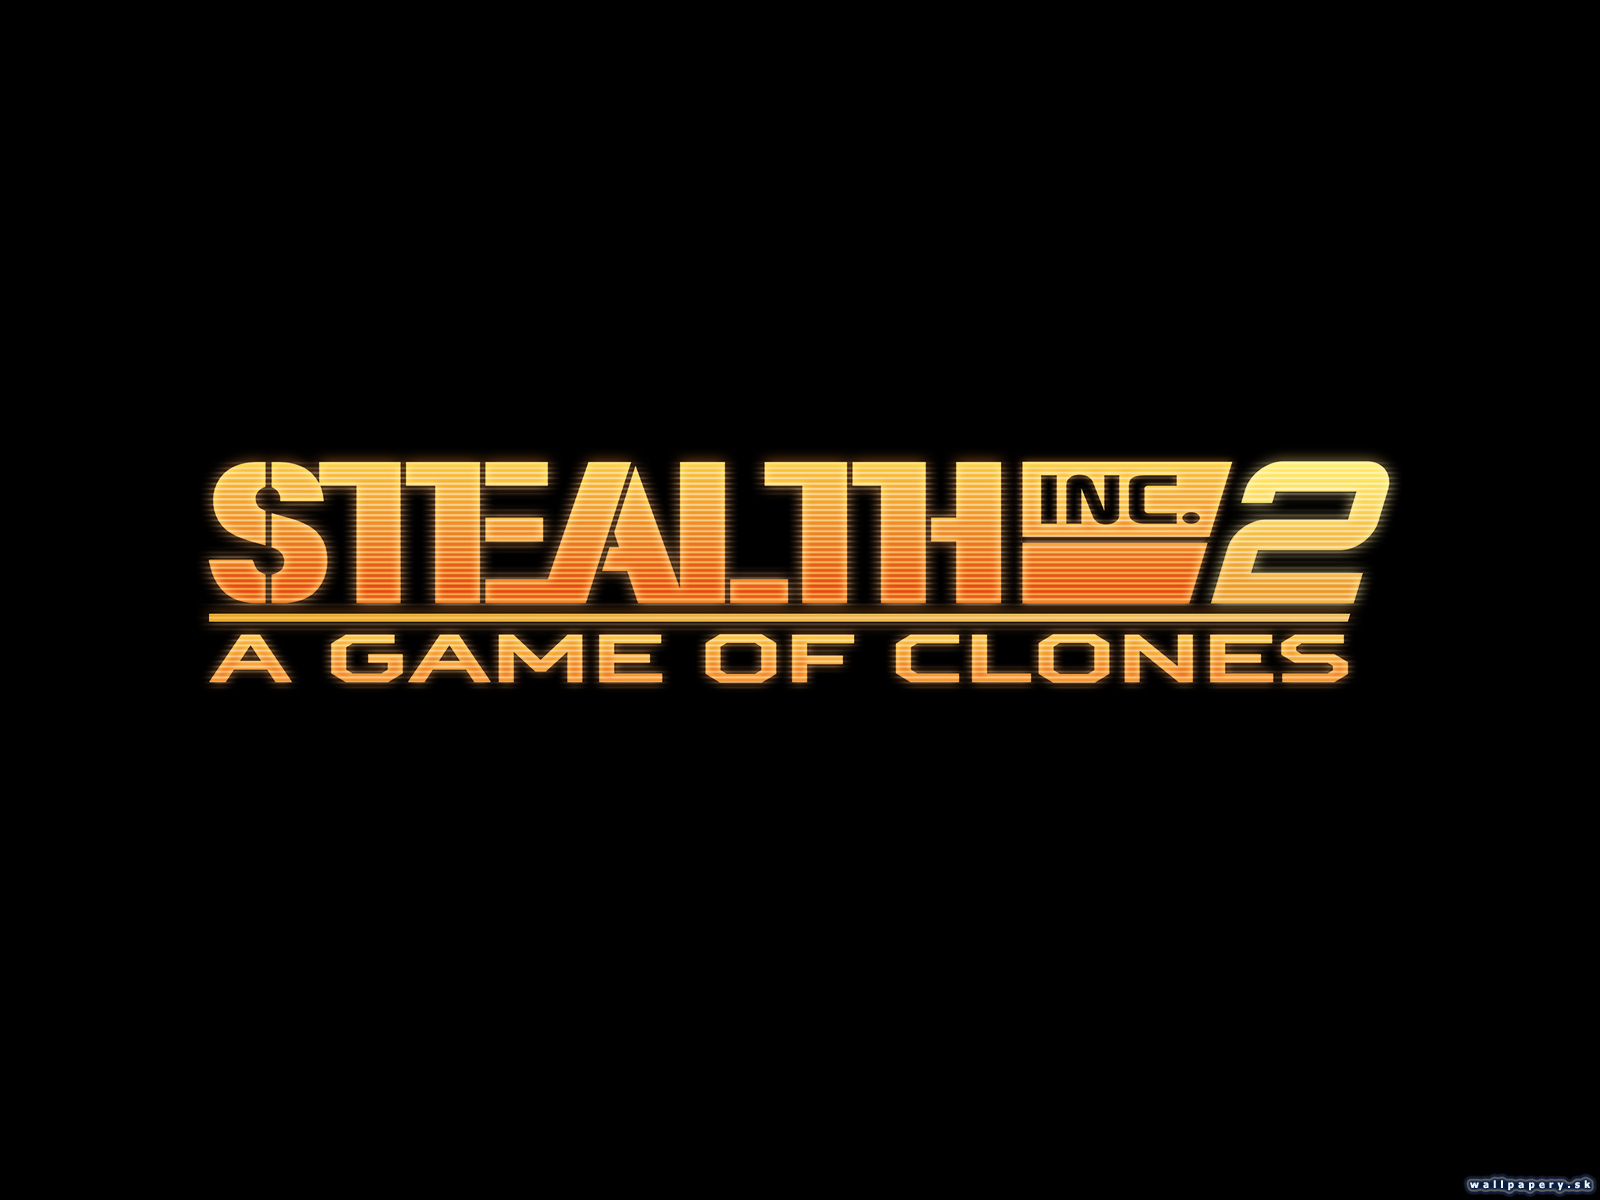 Stealth Inc 2: A Game of Clones - wallpaper 5